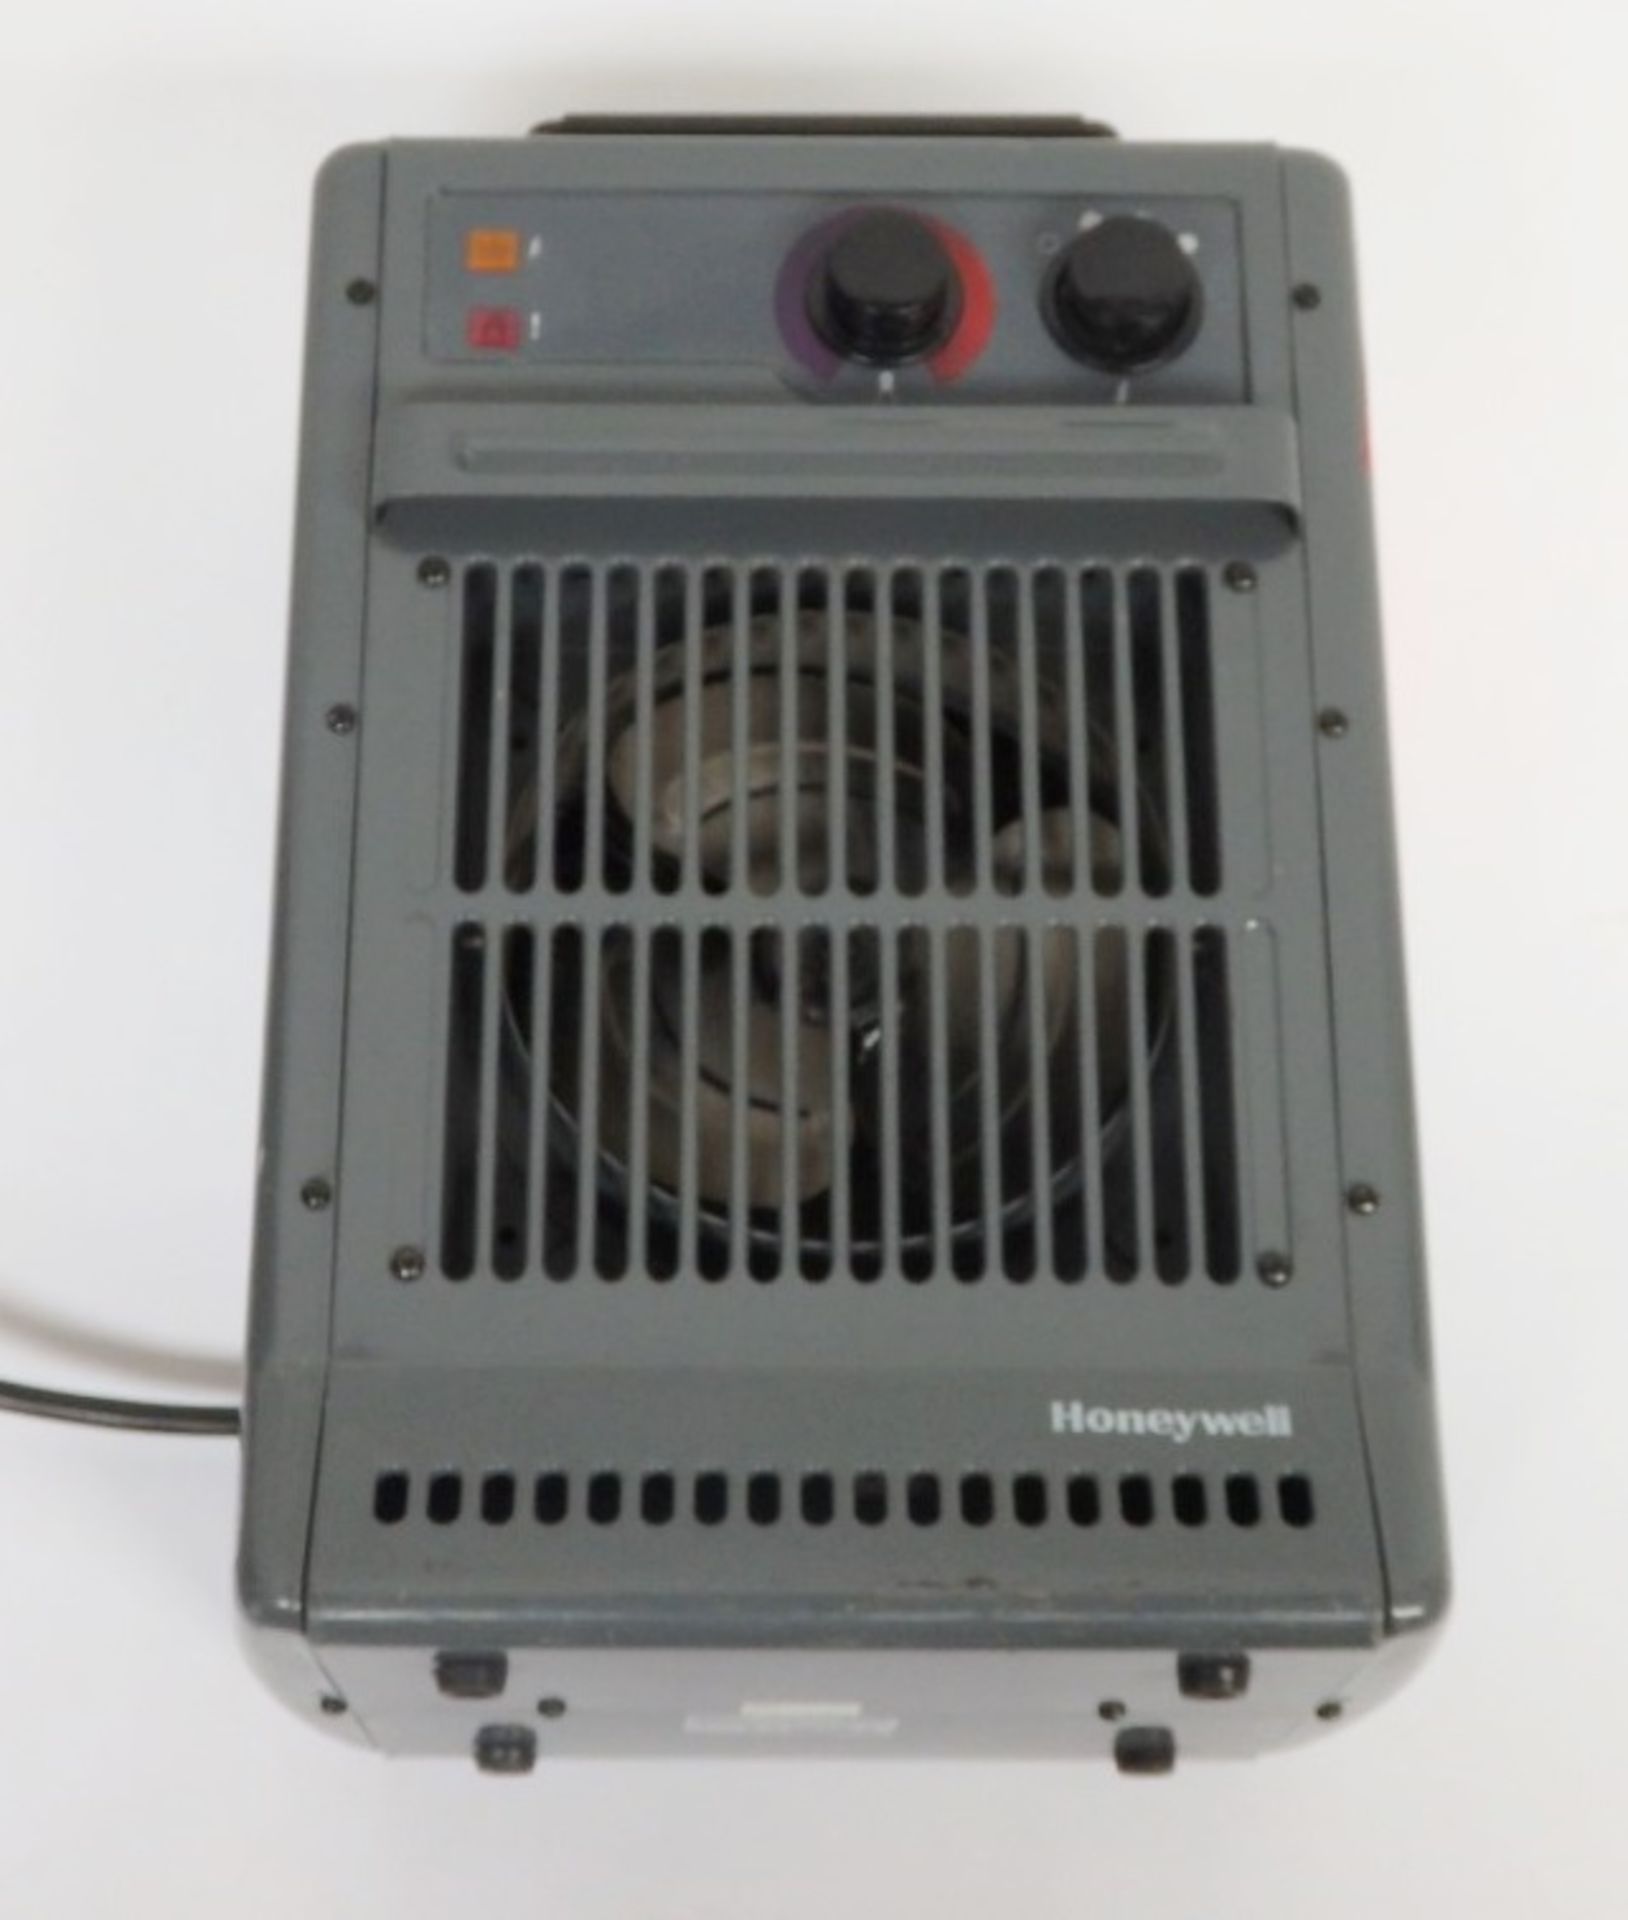 1 x Honeywell CZ-2104E Metal Fan Heater - Dimensions: 26 x 19 x 44 cm, Weight: 3.9 Kg - Recently - Image 3 of 5